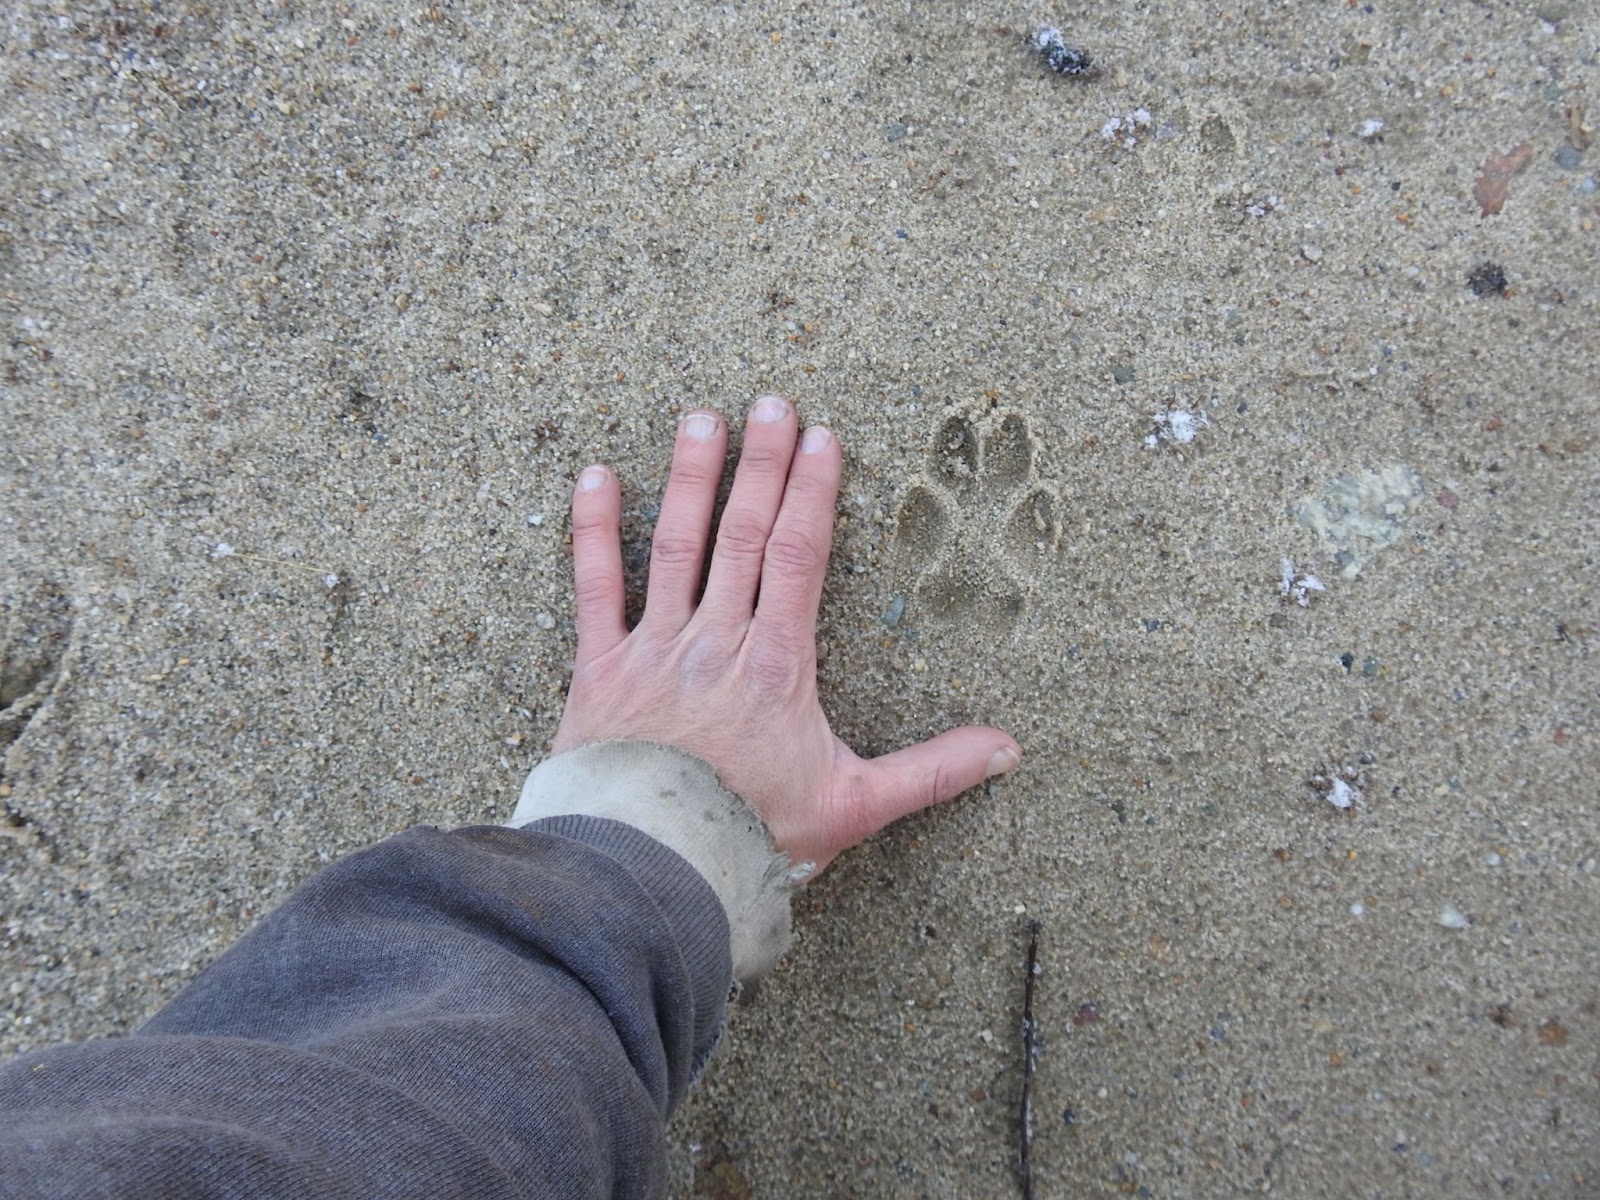 Coyote print in wet sand next to a human hand for size comparison.